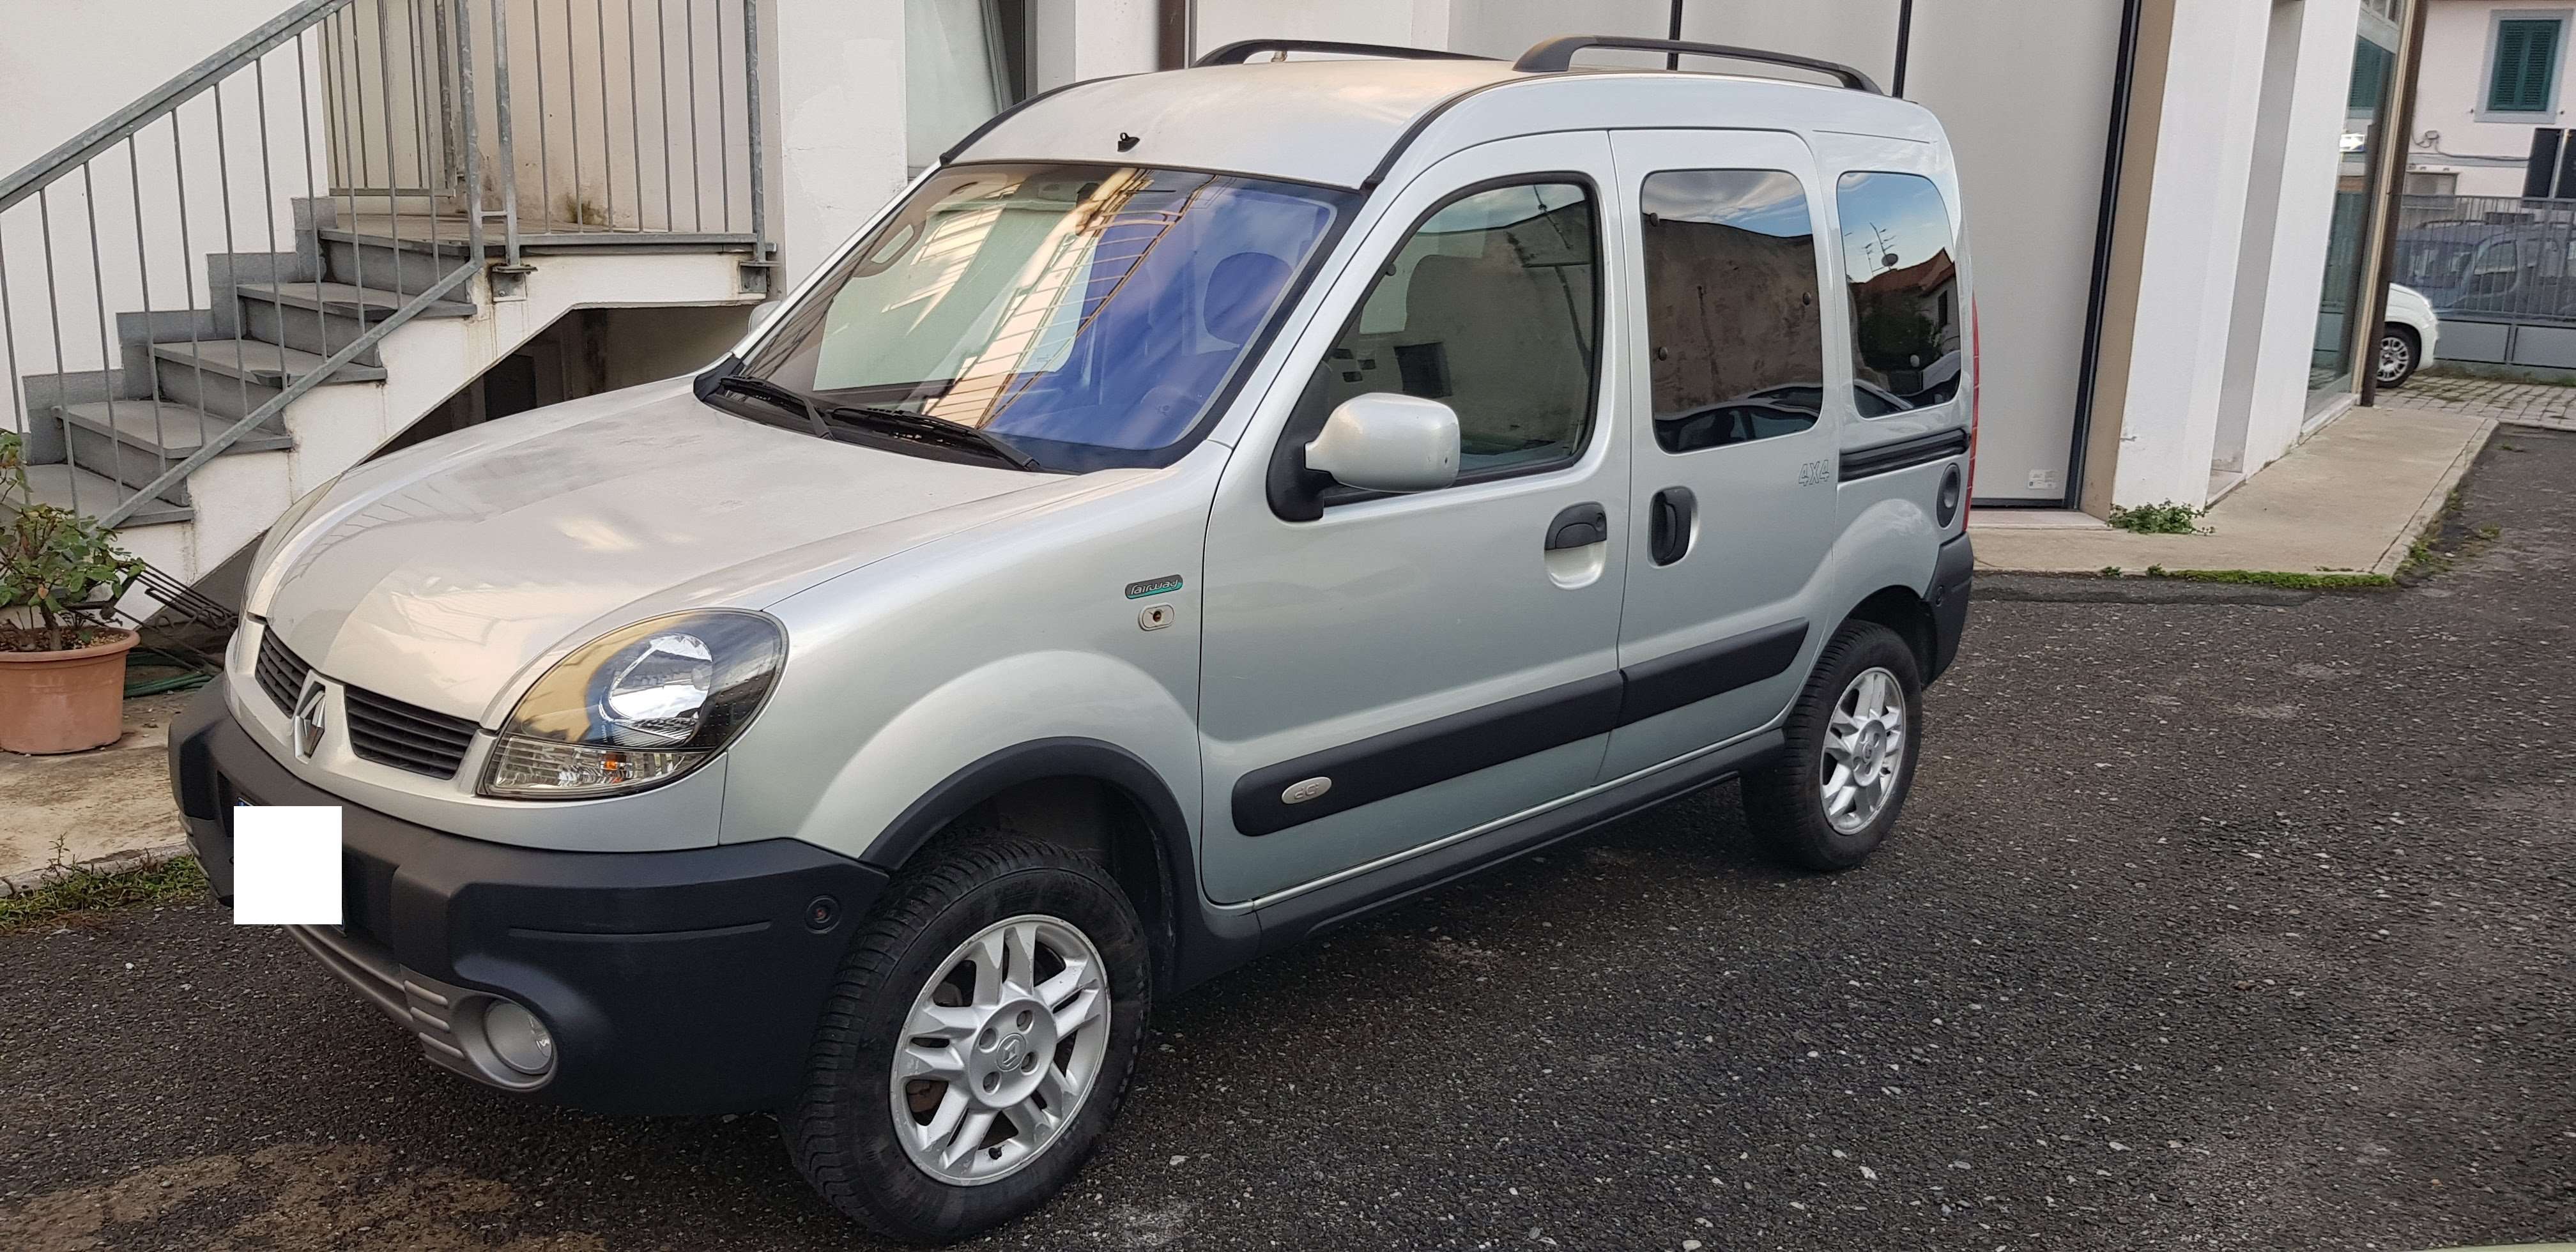 Renault Kangoo Off-Road/Pick-up in Silver used in Stagno - Livorno - LI for € 5,500.-